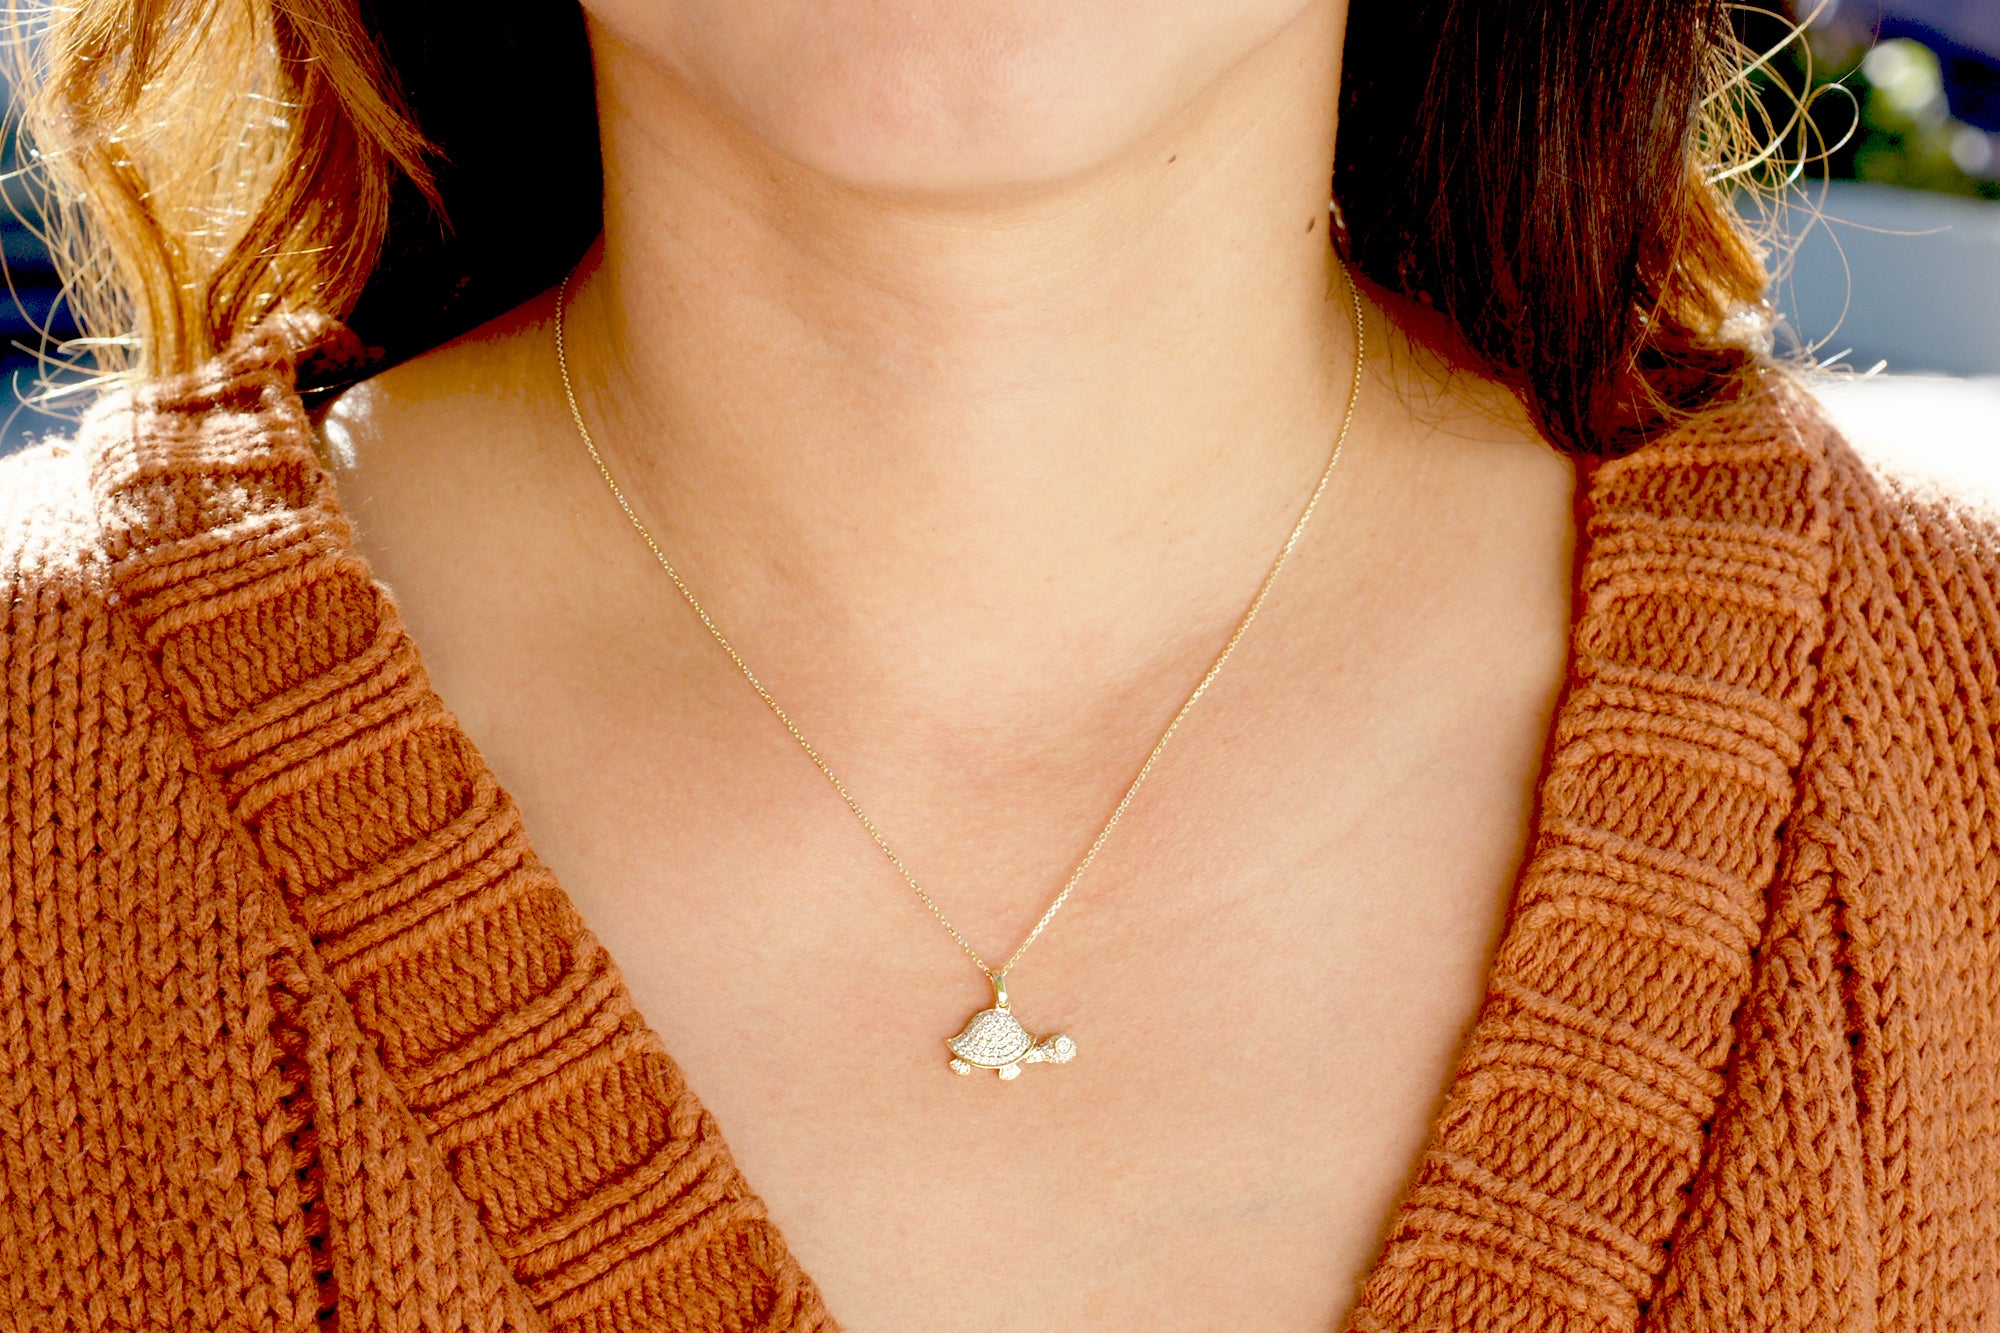 All white diamond turtle necklace on a model